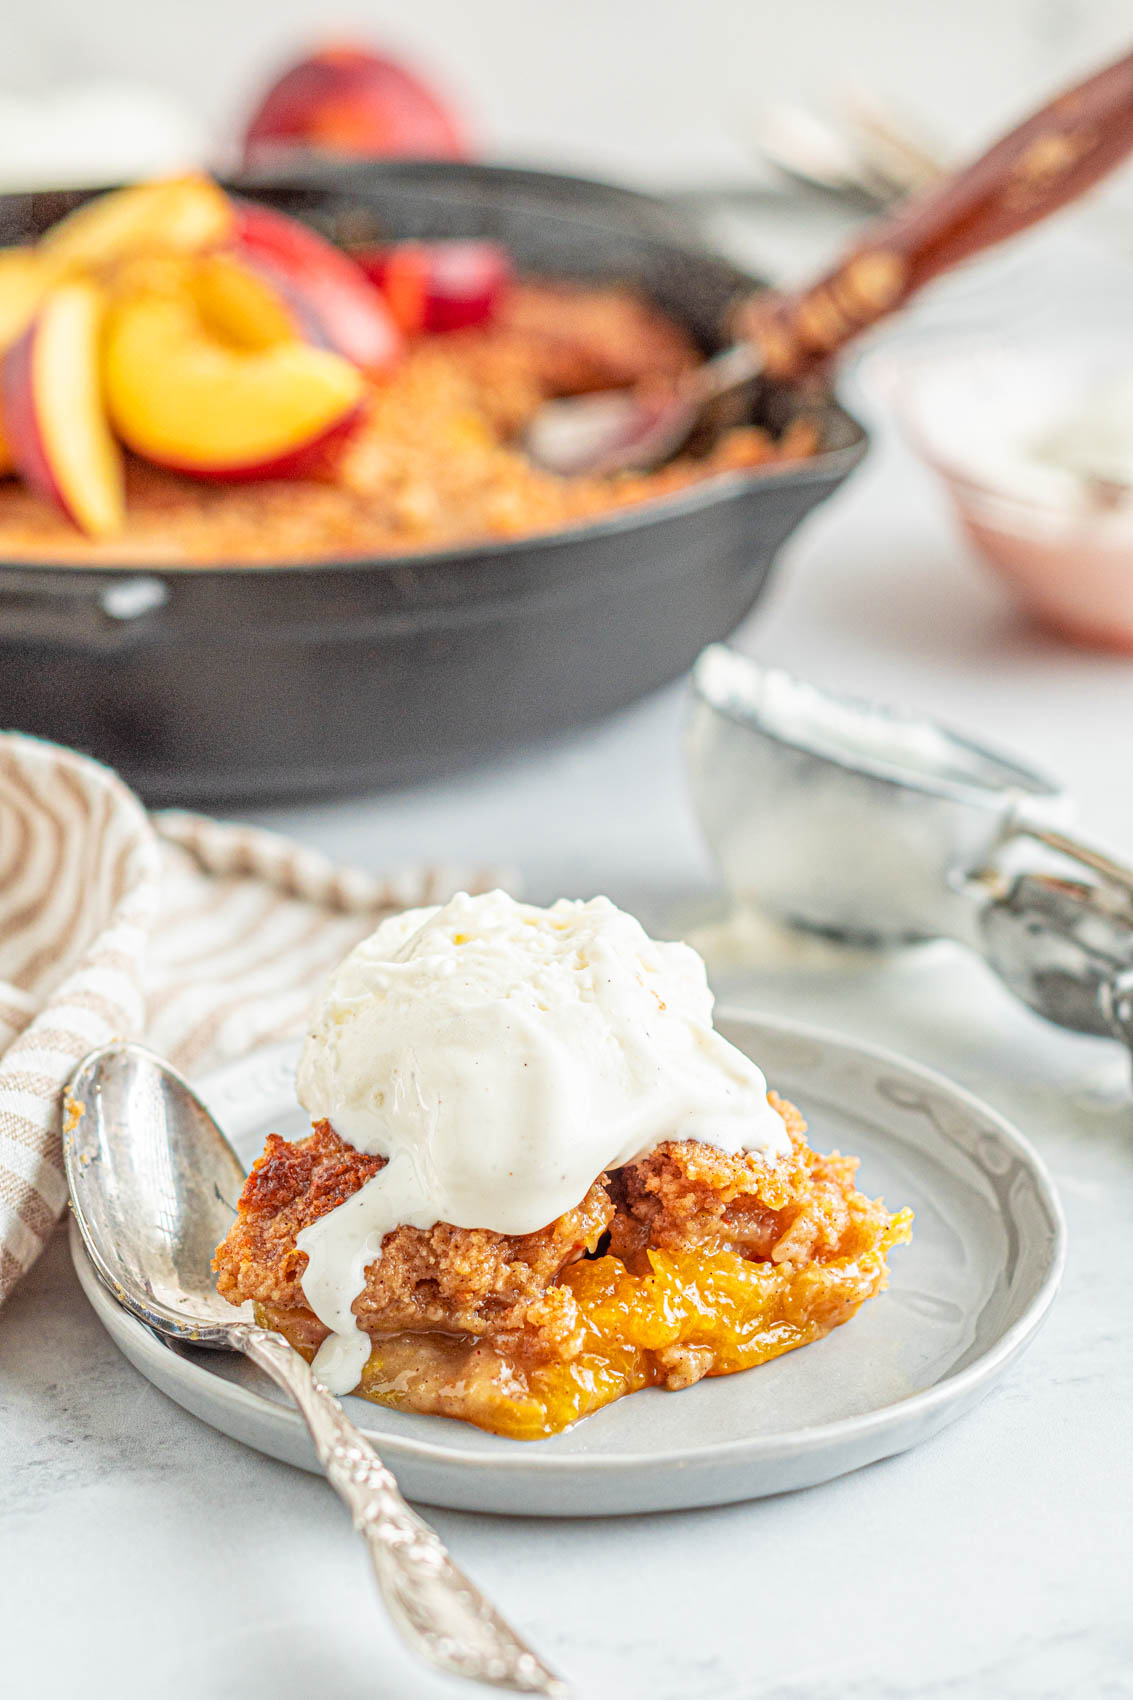 peach cobbler on a plate with a spoon and vanilla ice cream melting over the top with a cast iron skillet in background